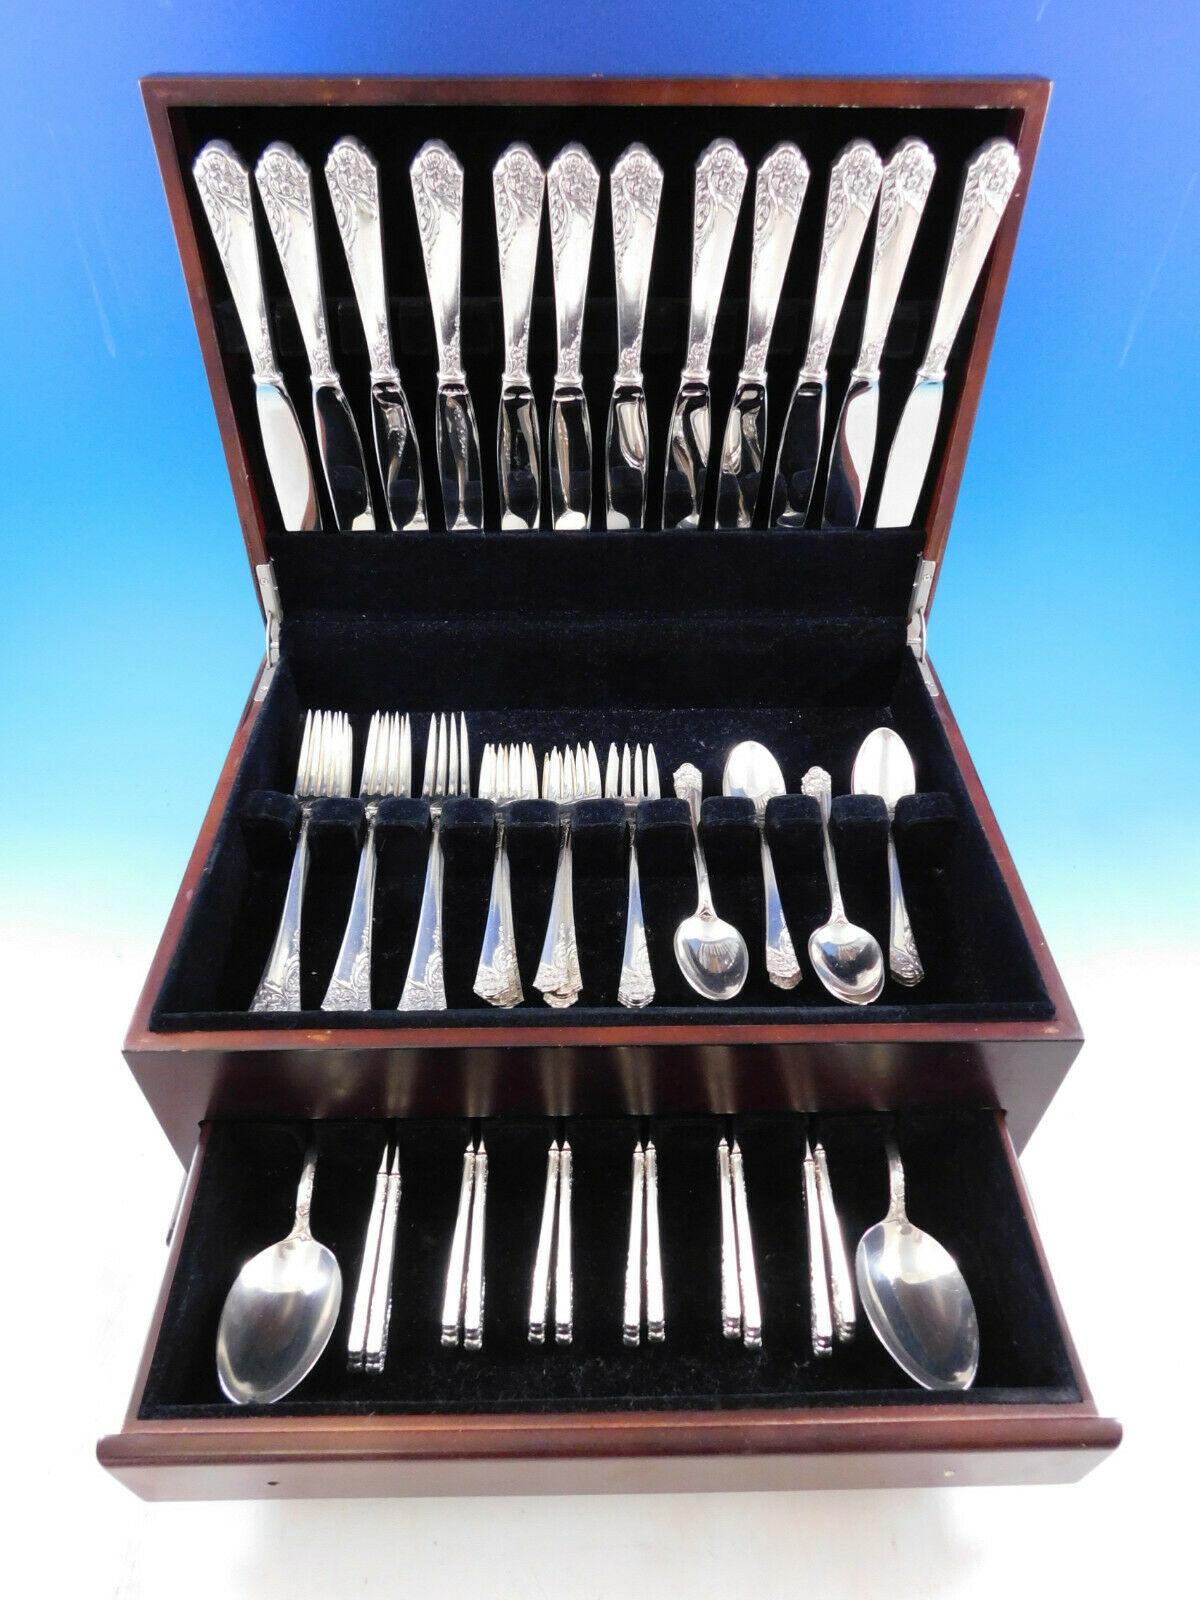 Dinner size Ecstacy by Amston c1951 Sterling silver Flatware set with a sweeping floral design, 62 pieces. This set includes:

12 Dinner Size Knives, 9 3/4